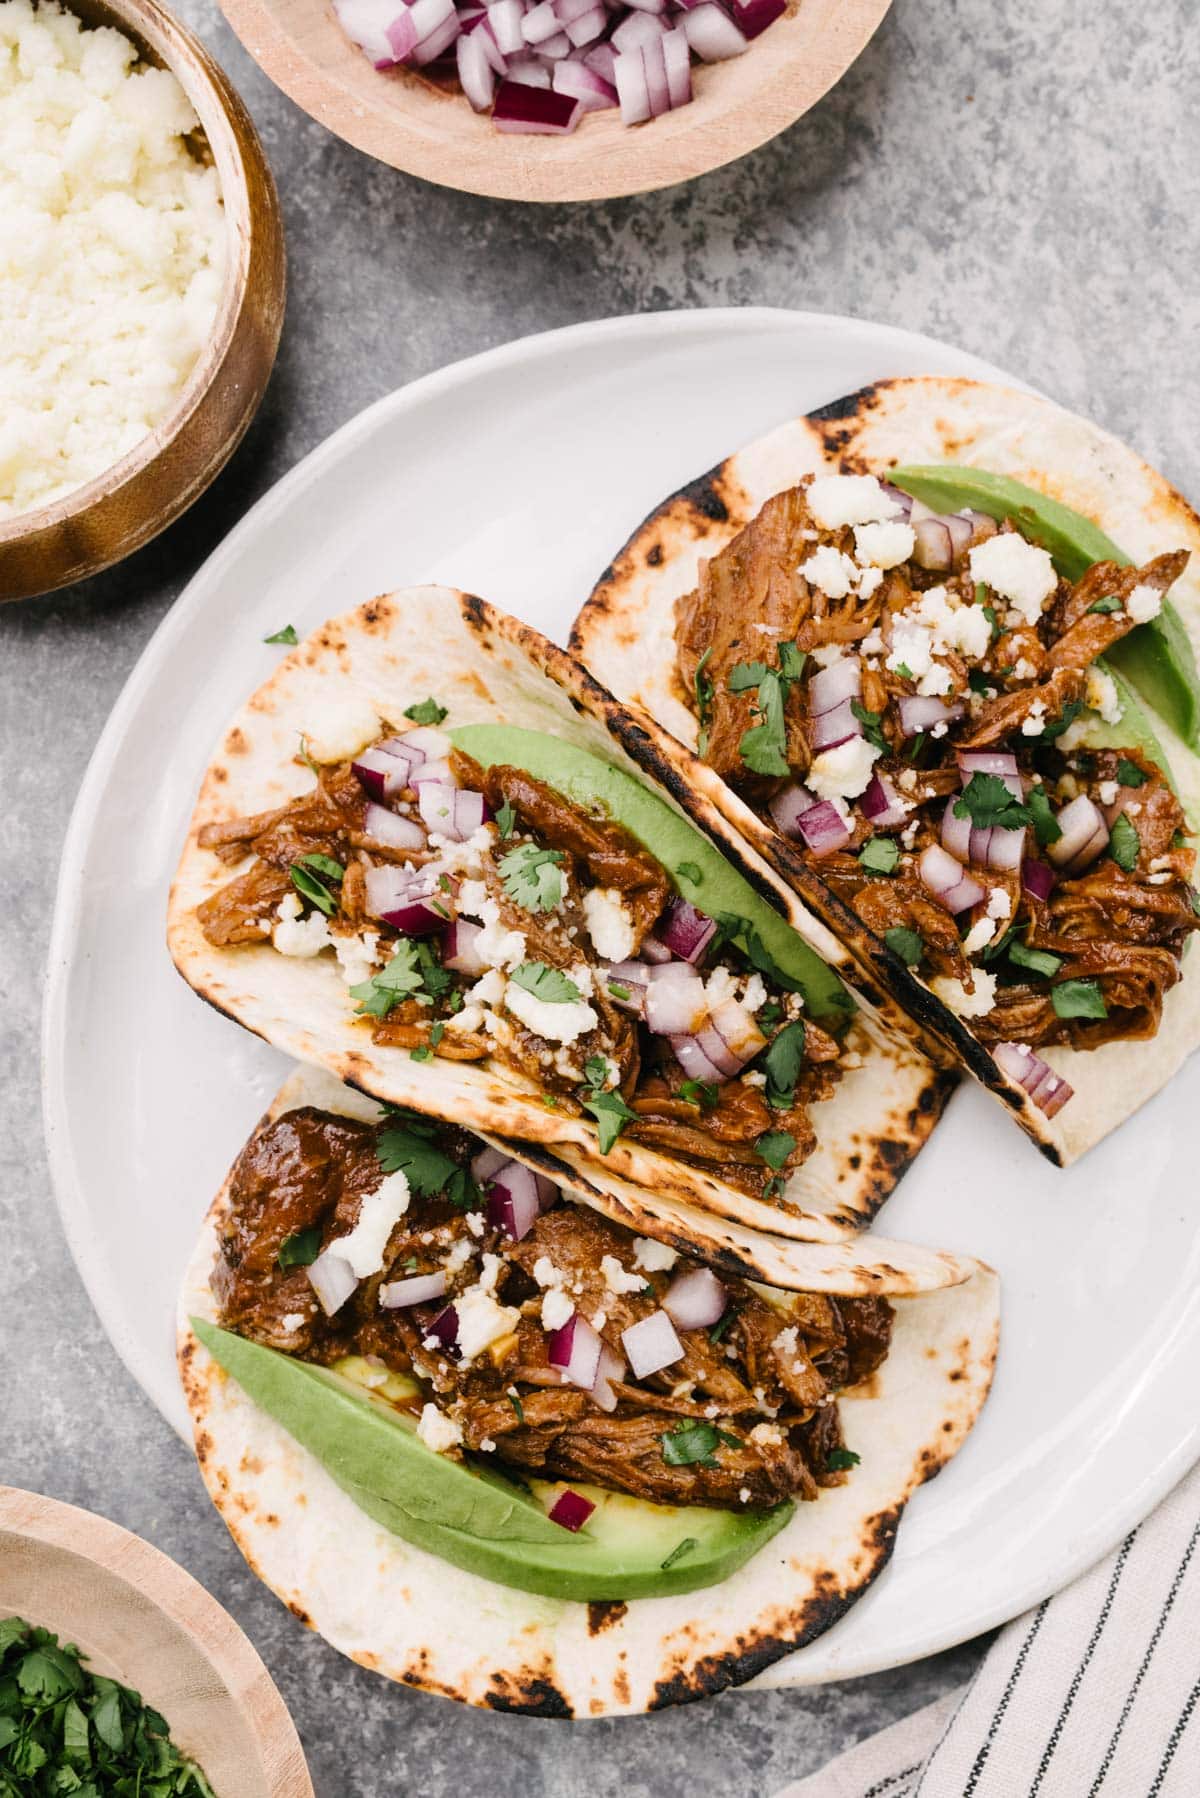 Three shredded beef tacos on a white plate garnished with avocado slices, diced red onion, and crumbled queso fresco; a linen napkin and small bowls of garnishes surround the plate.